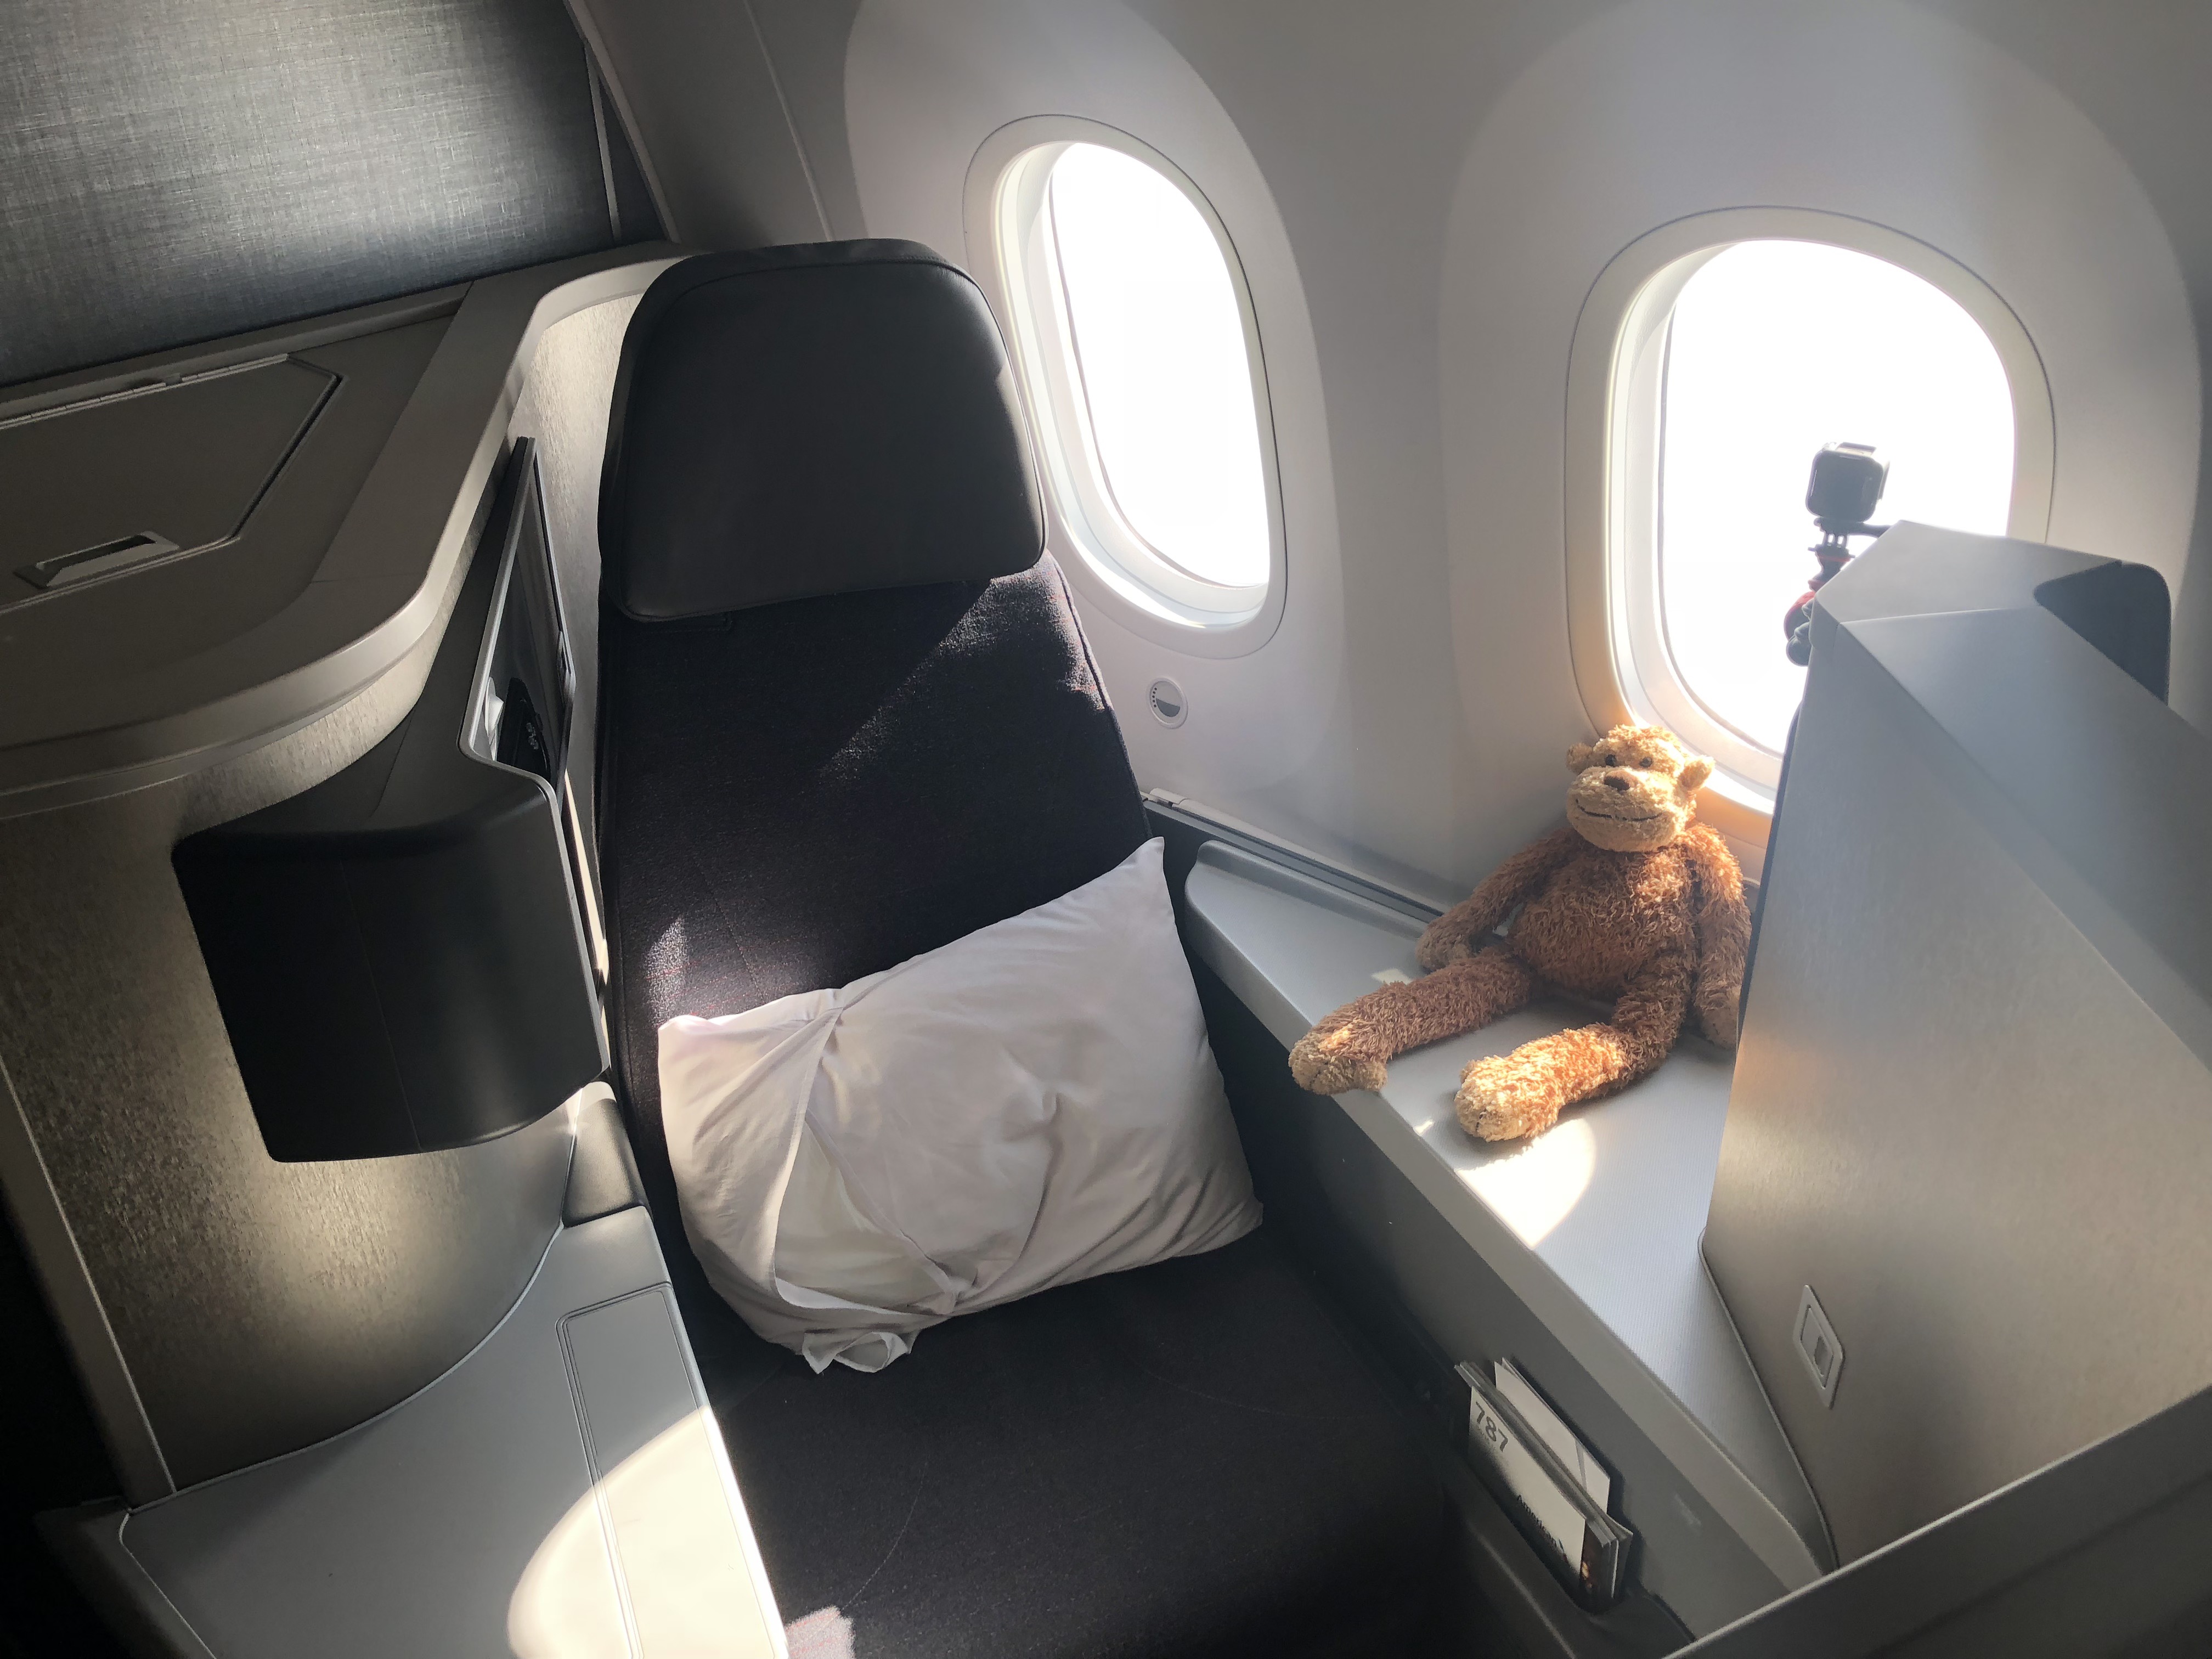 a stuffed animal sitting on a seat in an airplane